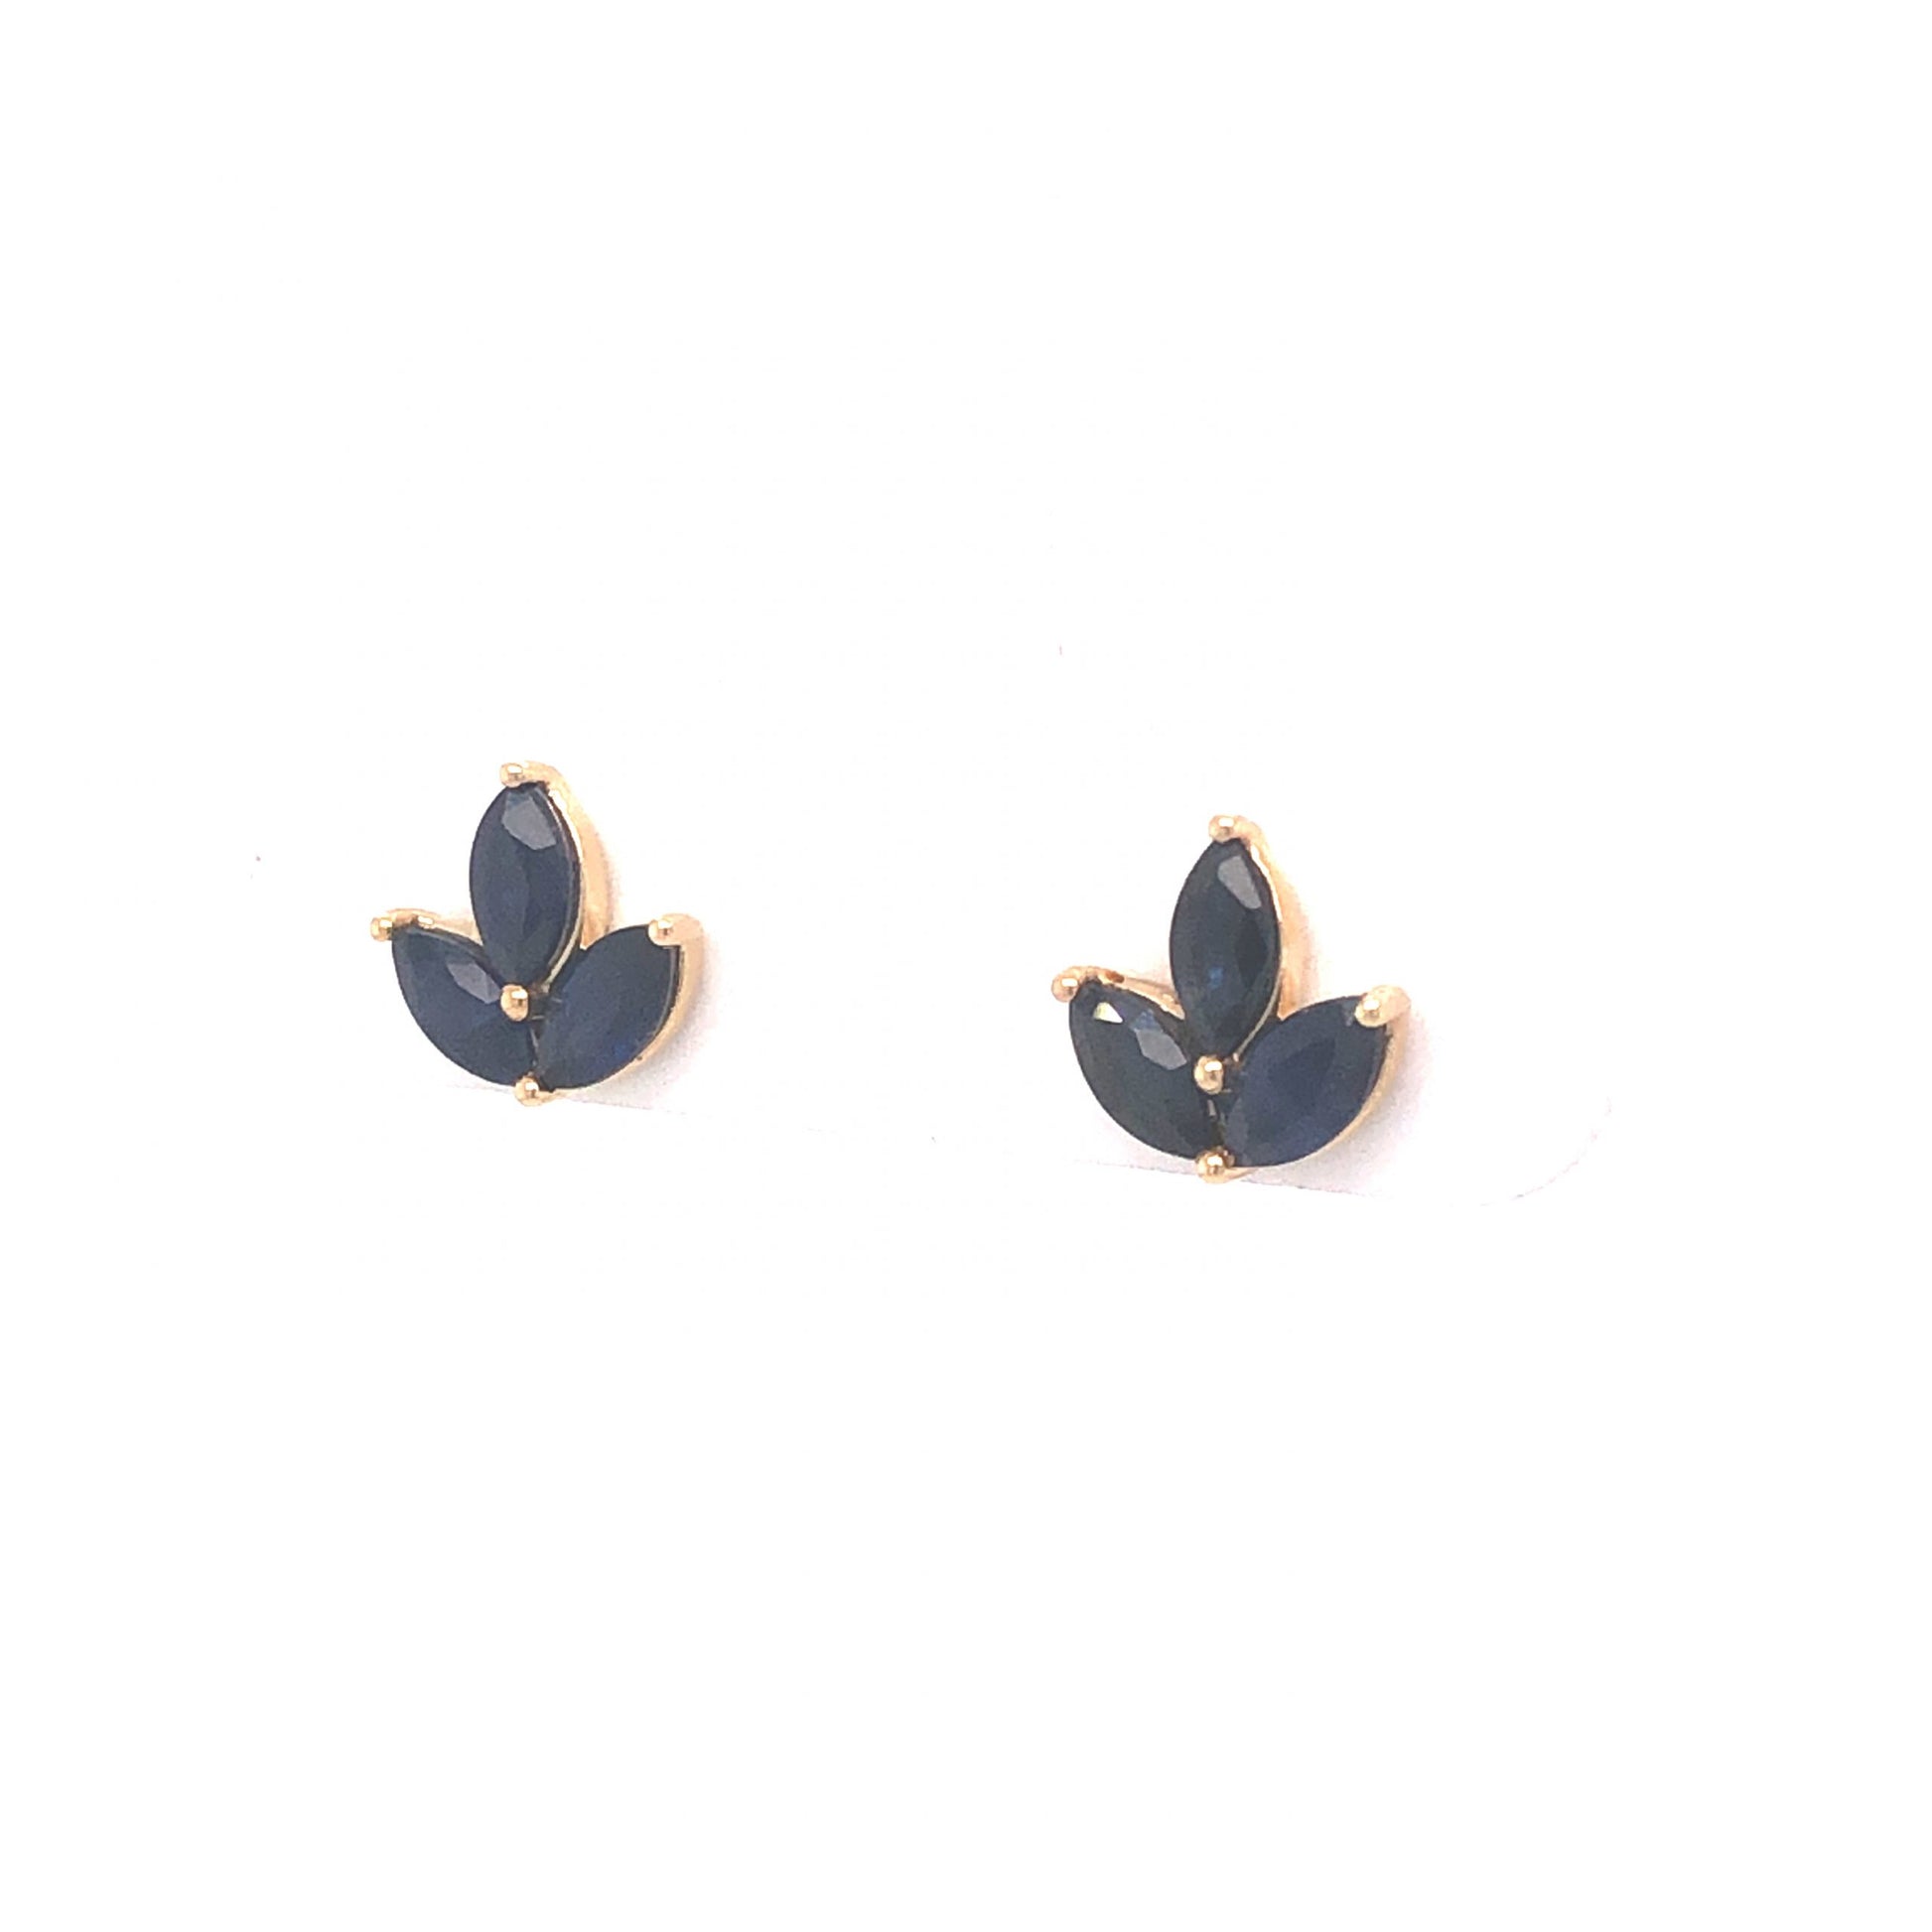 Marquise Cut Sapphire Stud Earrings in 14k Yellow GoldComposition: PlatinumTotal Gram Weight: 1.3 gInscription: 14k